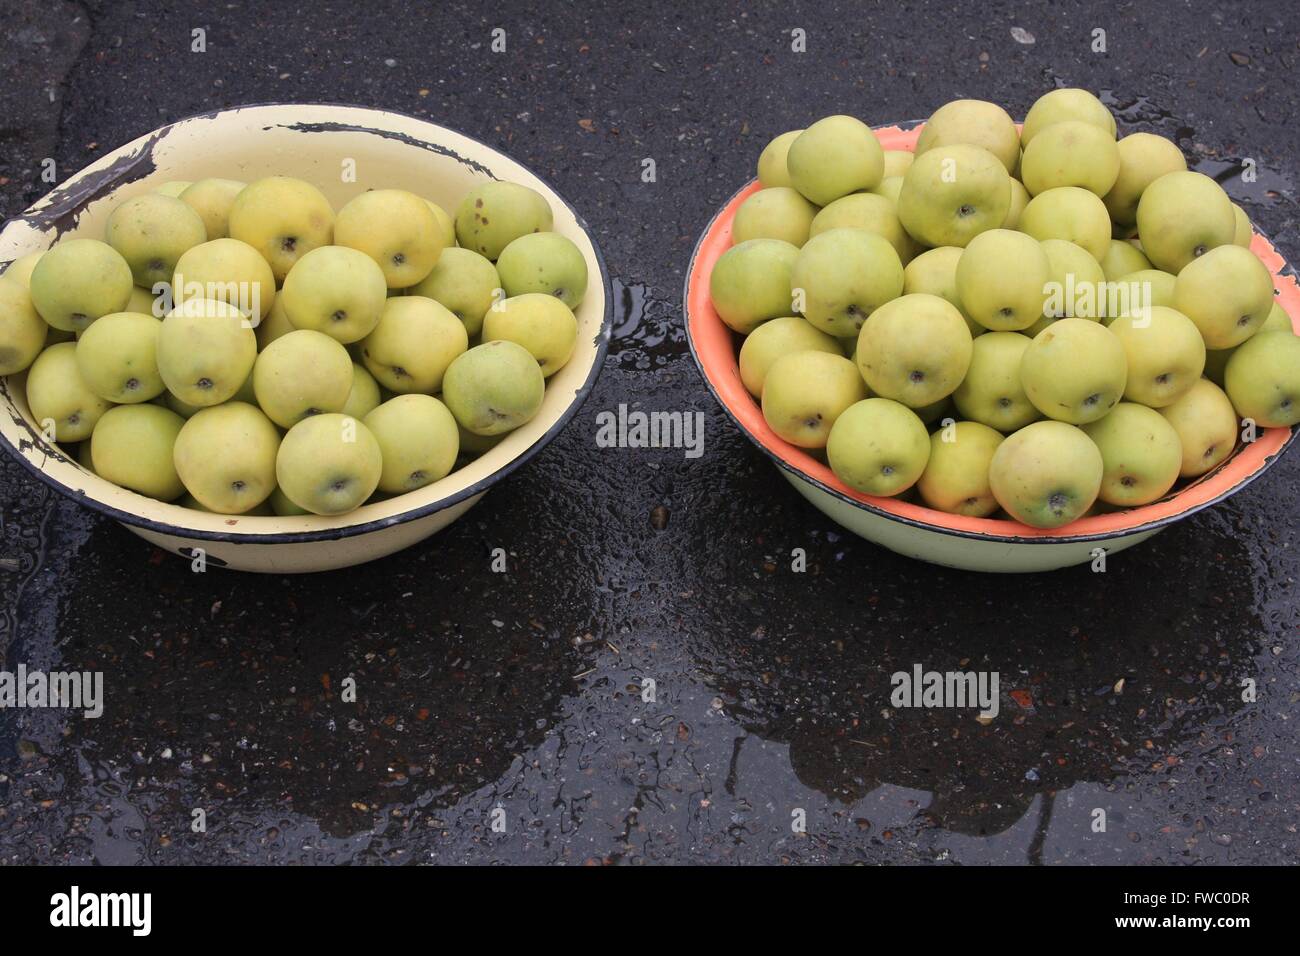 Apples and other fruit in the markets are often displayed for sale in large bowls.  Tashkent, Uzbekistan. Stock Photo